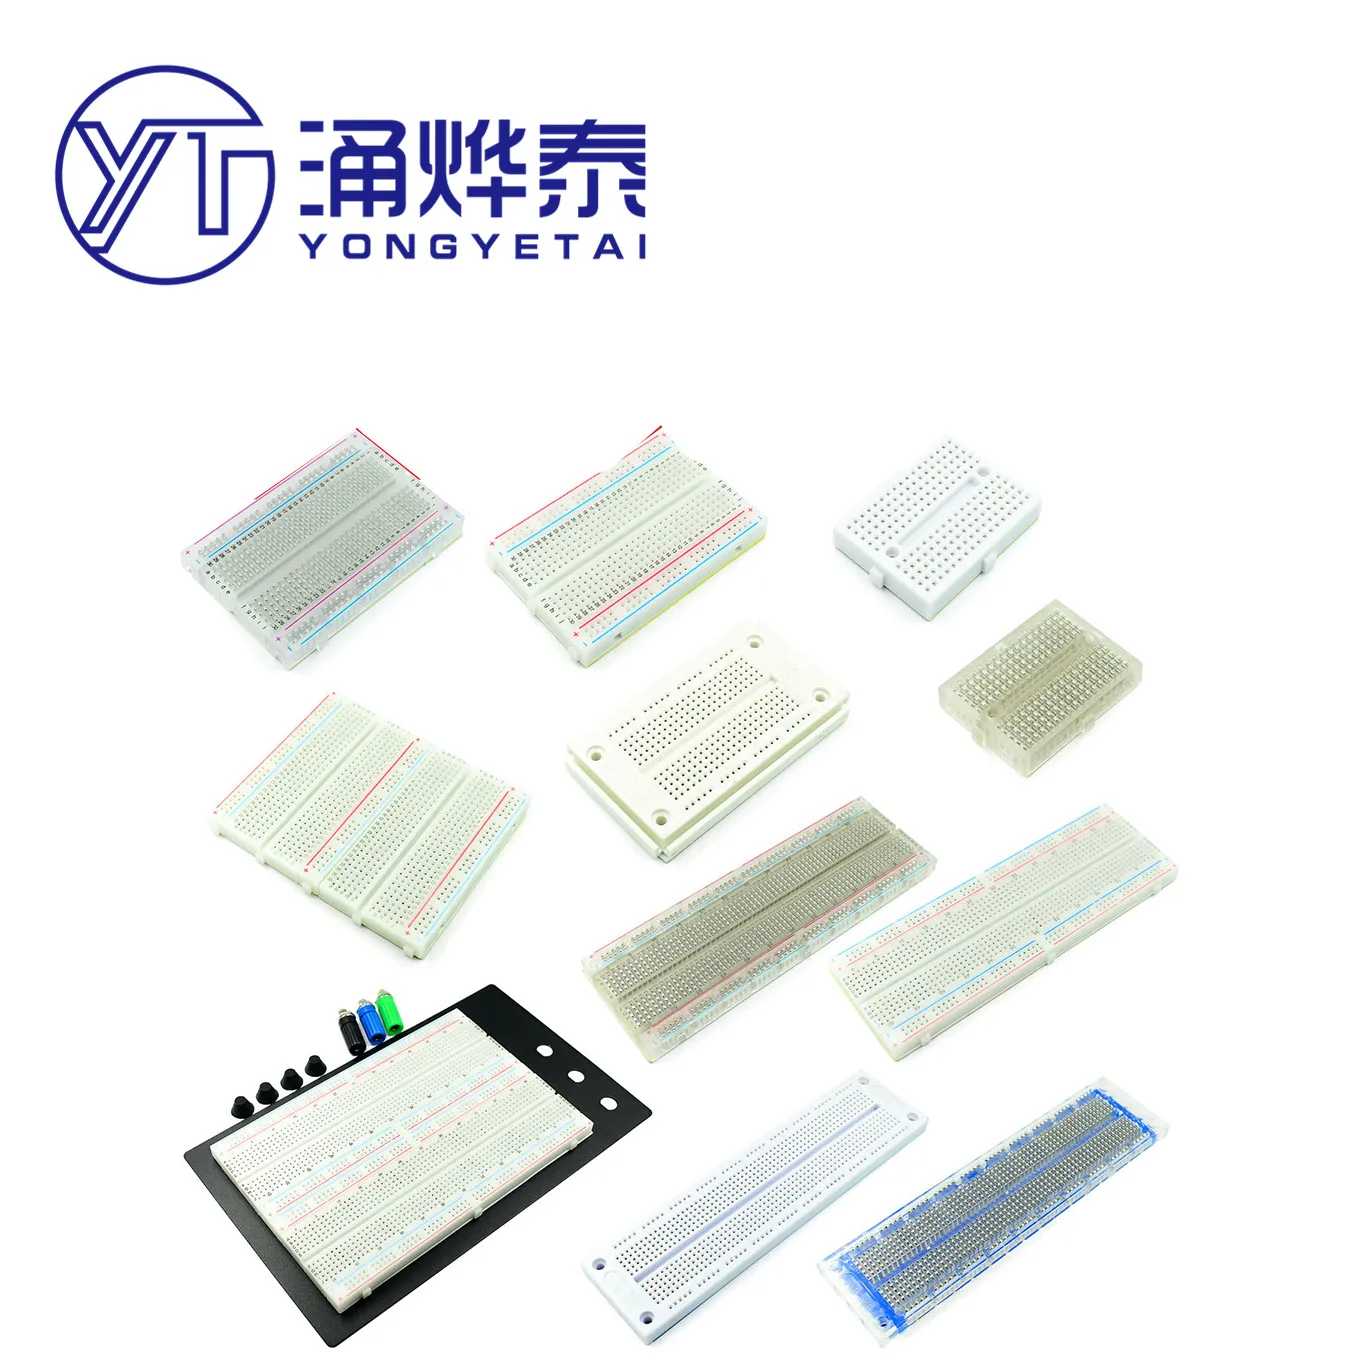 

YYT Commonly used breadboard SYB-120/-170/-46 MB-102 connection line mini transparent splicable hole board experiment board